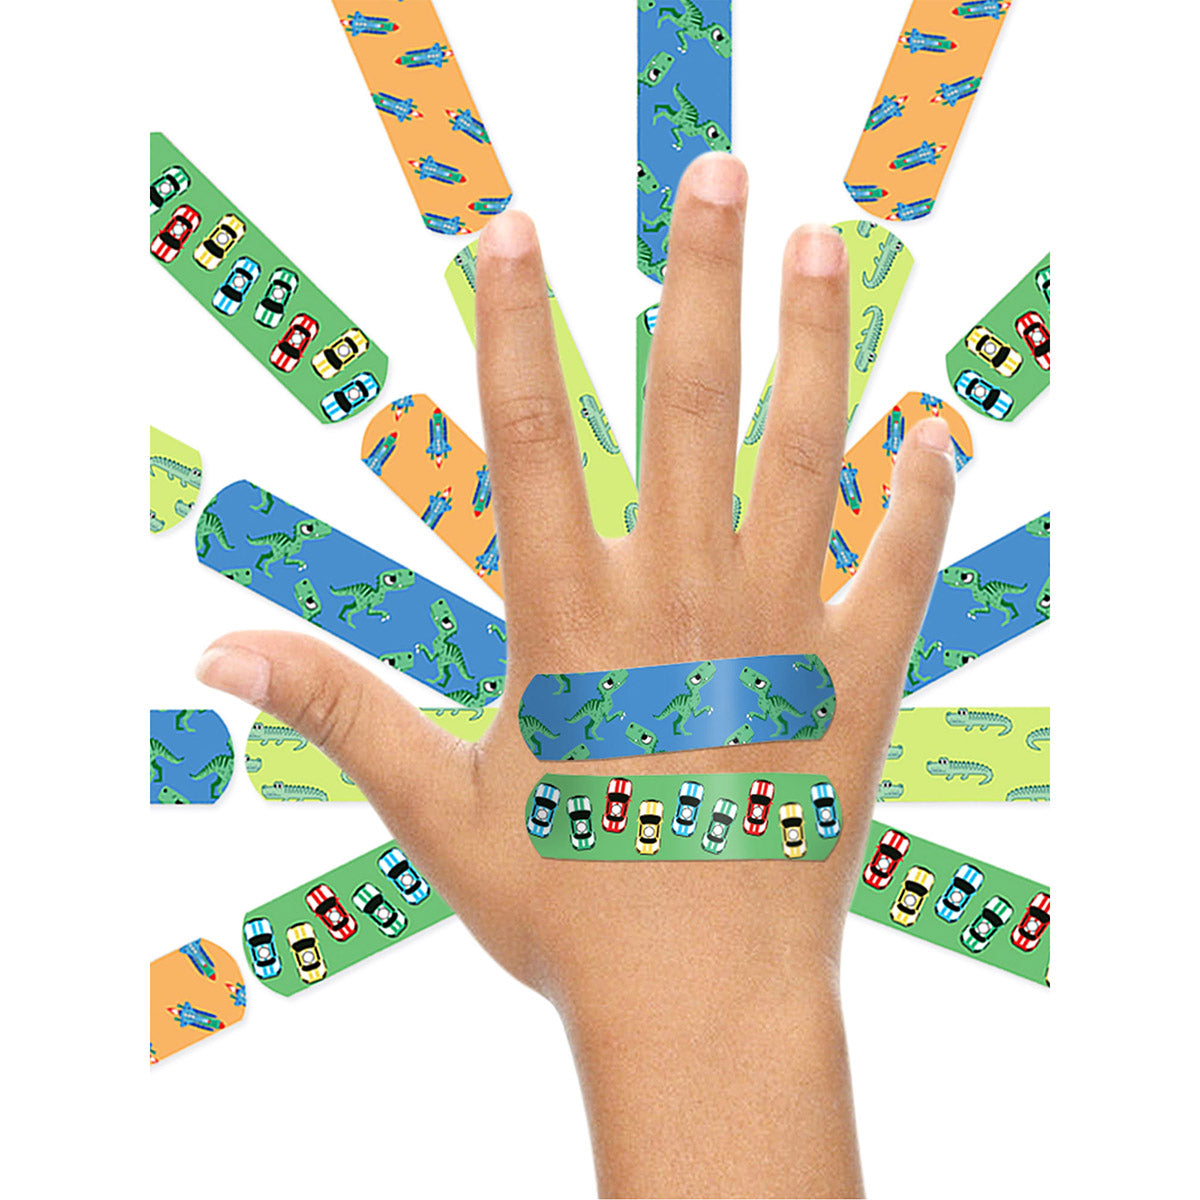 'Ouchie Printed Bandages'  Combo Pack of 2 (20 x 2 = 40) (Pink & Blue)